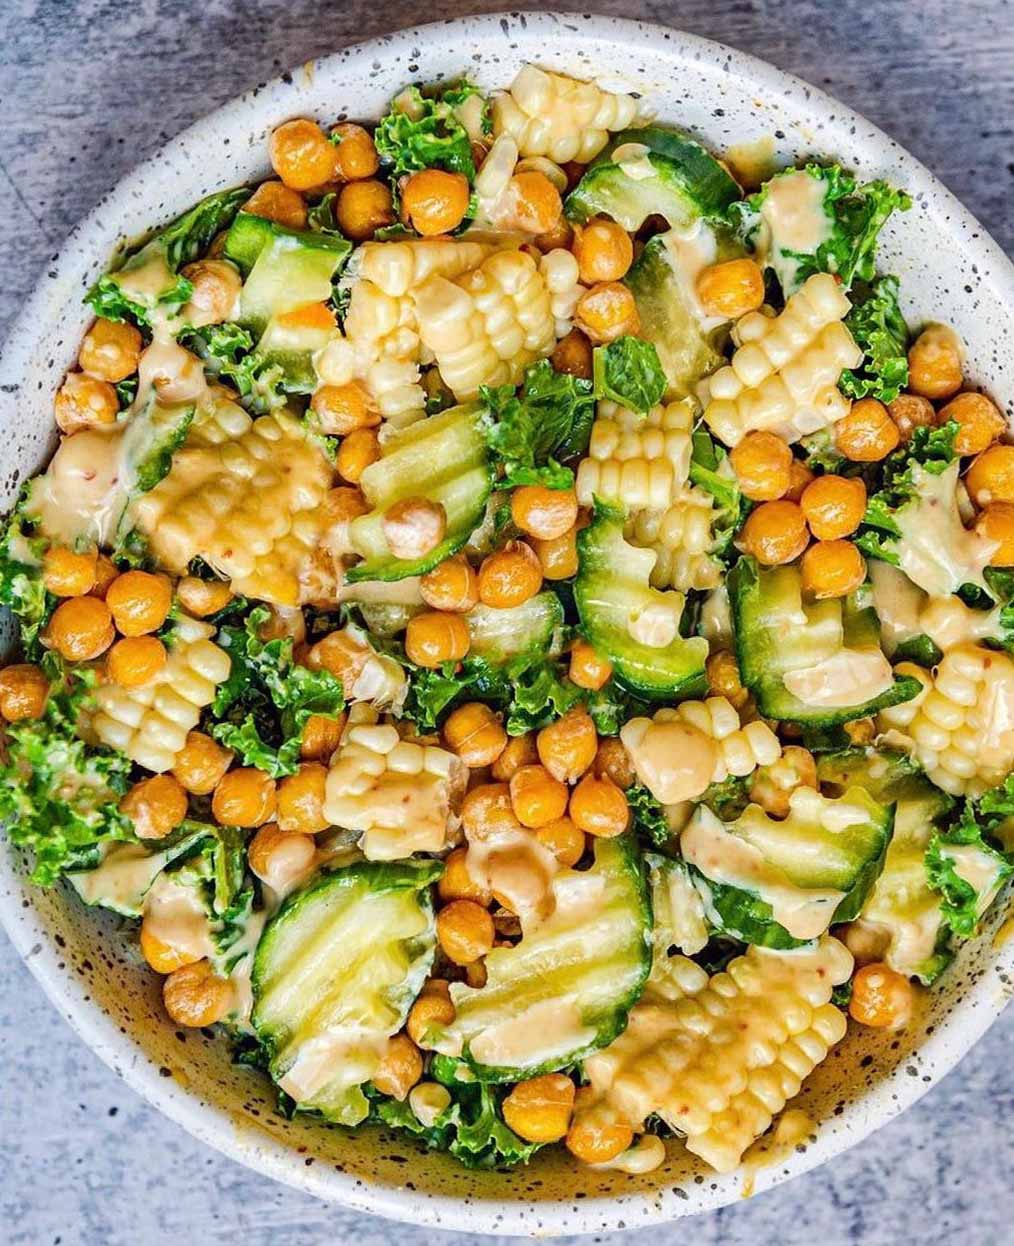 Roasted Chickpea Salad with Tangy Vegan Dressing